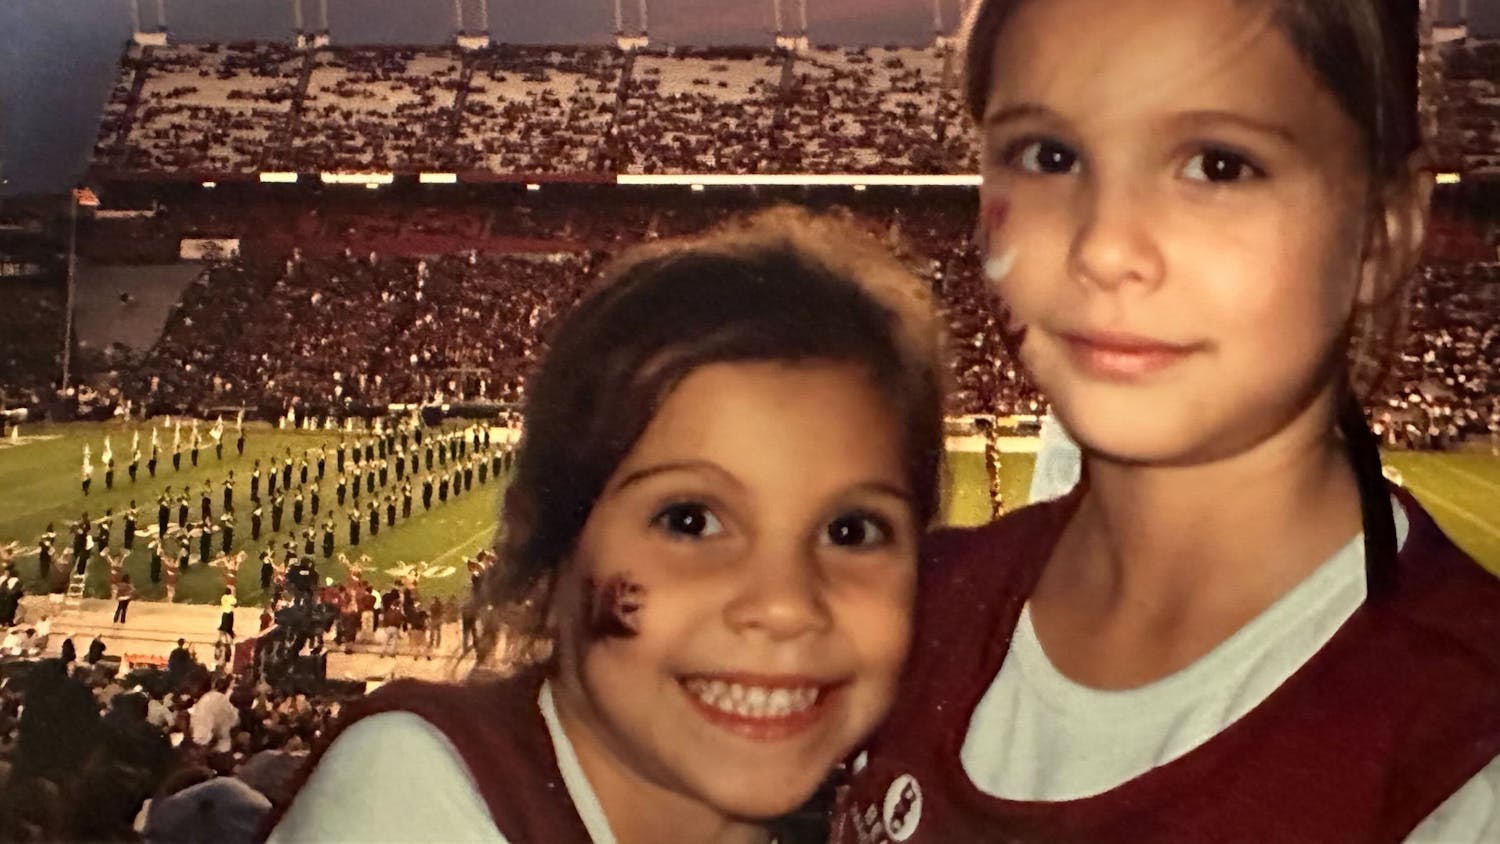 Camila Burnett (left) and Sophia Burnett (right) at Williams-Brice Stadium as young kids. More than a decade later, they would be reunited at the University of South Carolina as students and golf teammates.